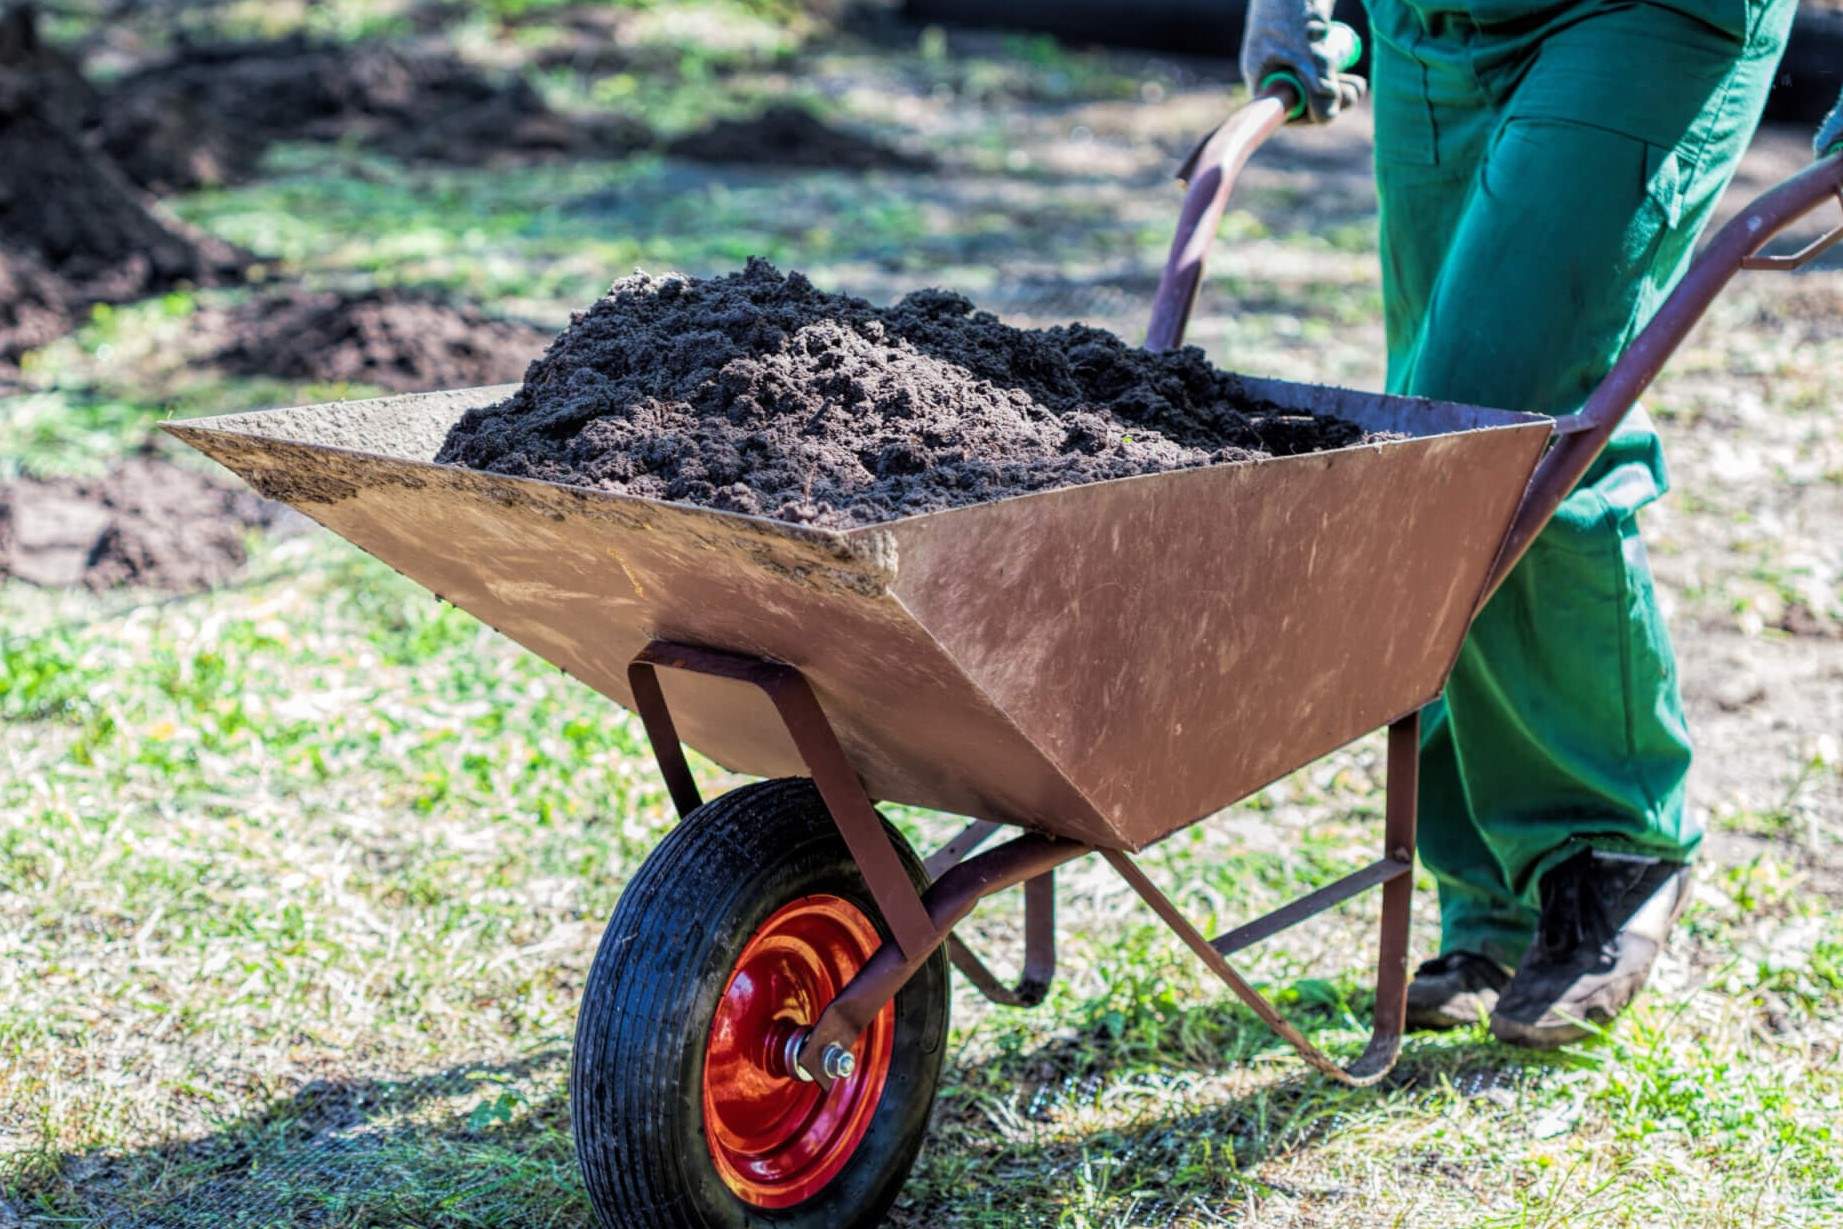 Discover The Surprising Number Of Wheelbarrows In A Yard Of Soil!